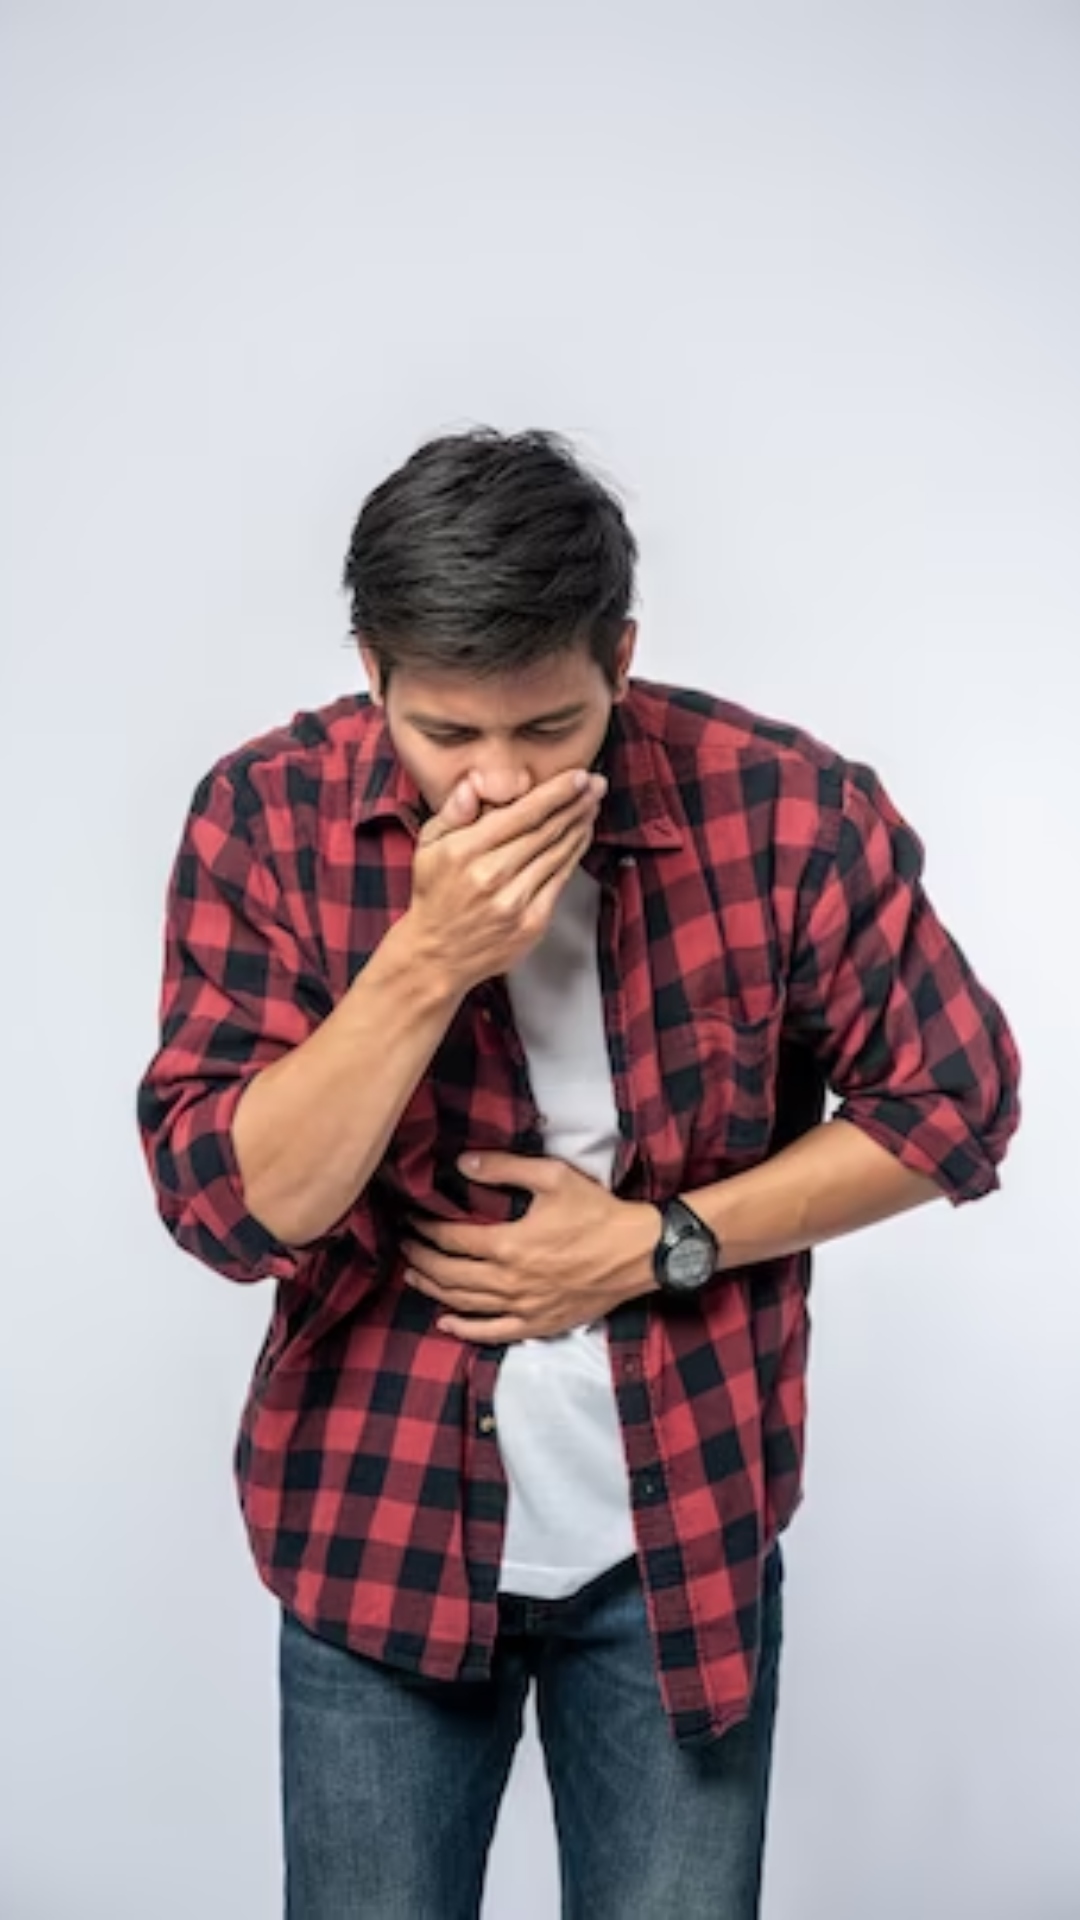 Home remedies that would provide relief from acid reflux &amp; indigestion